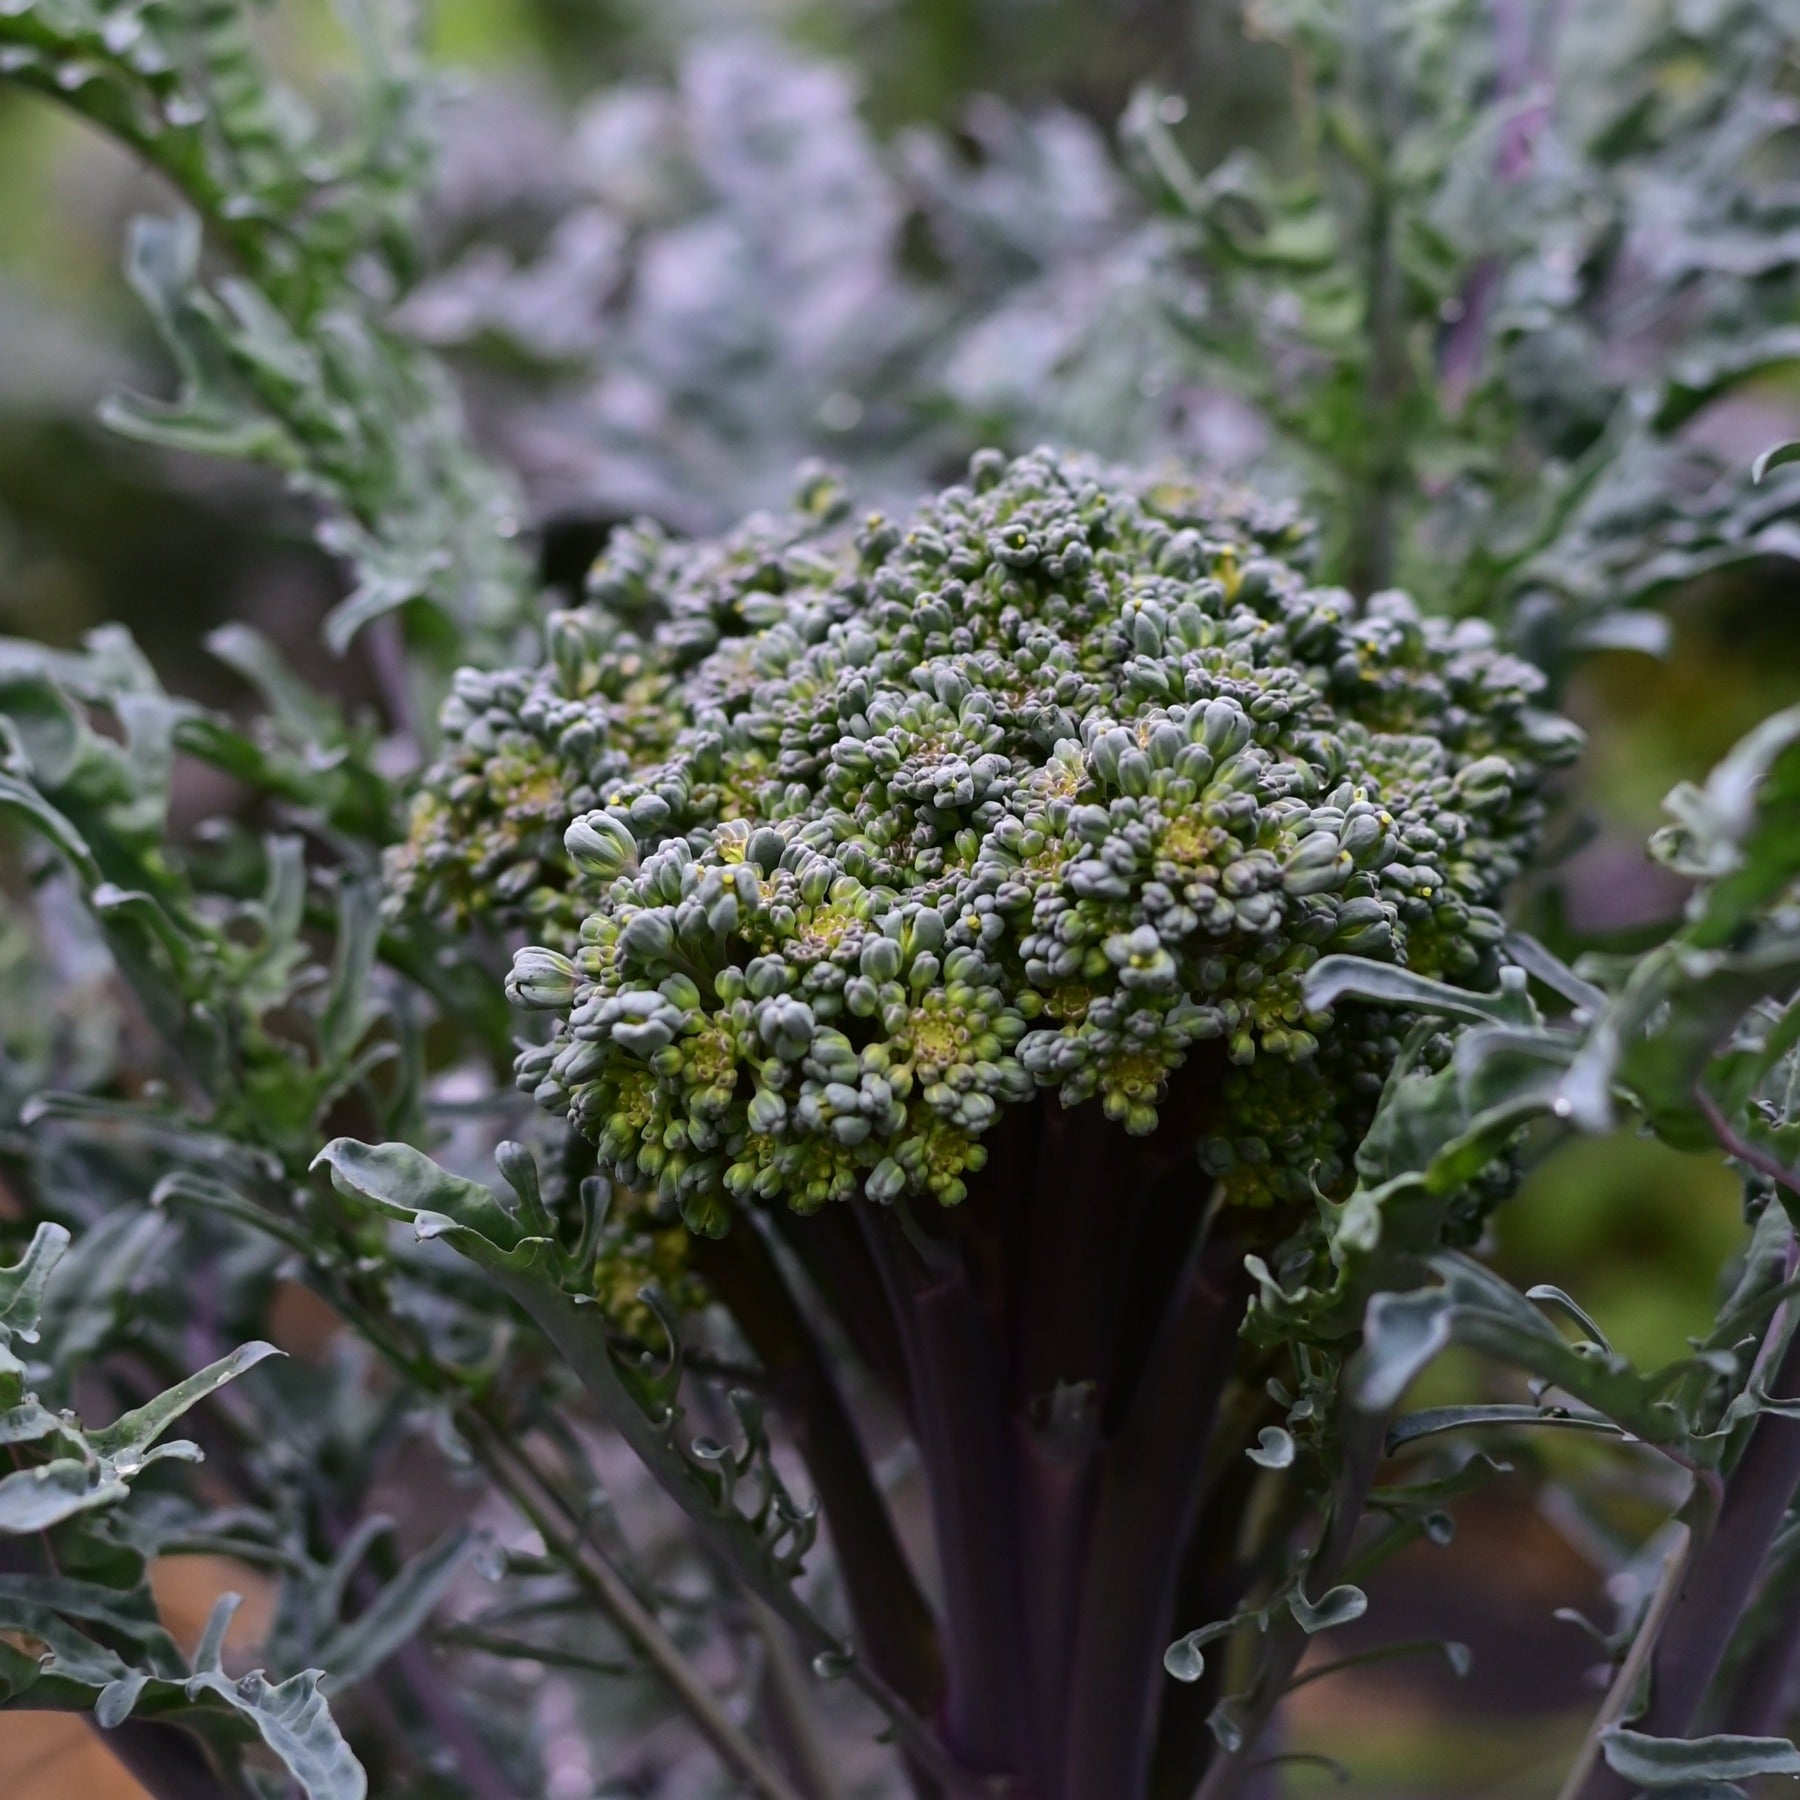 One of the side florets of purple peacock sprouting broccoli